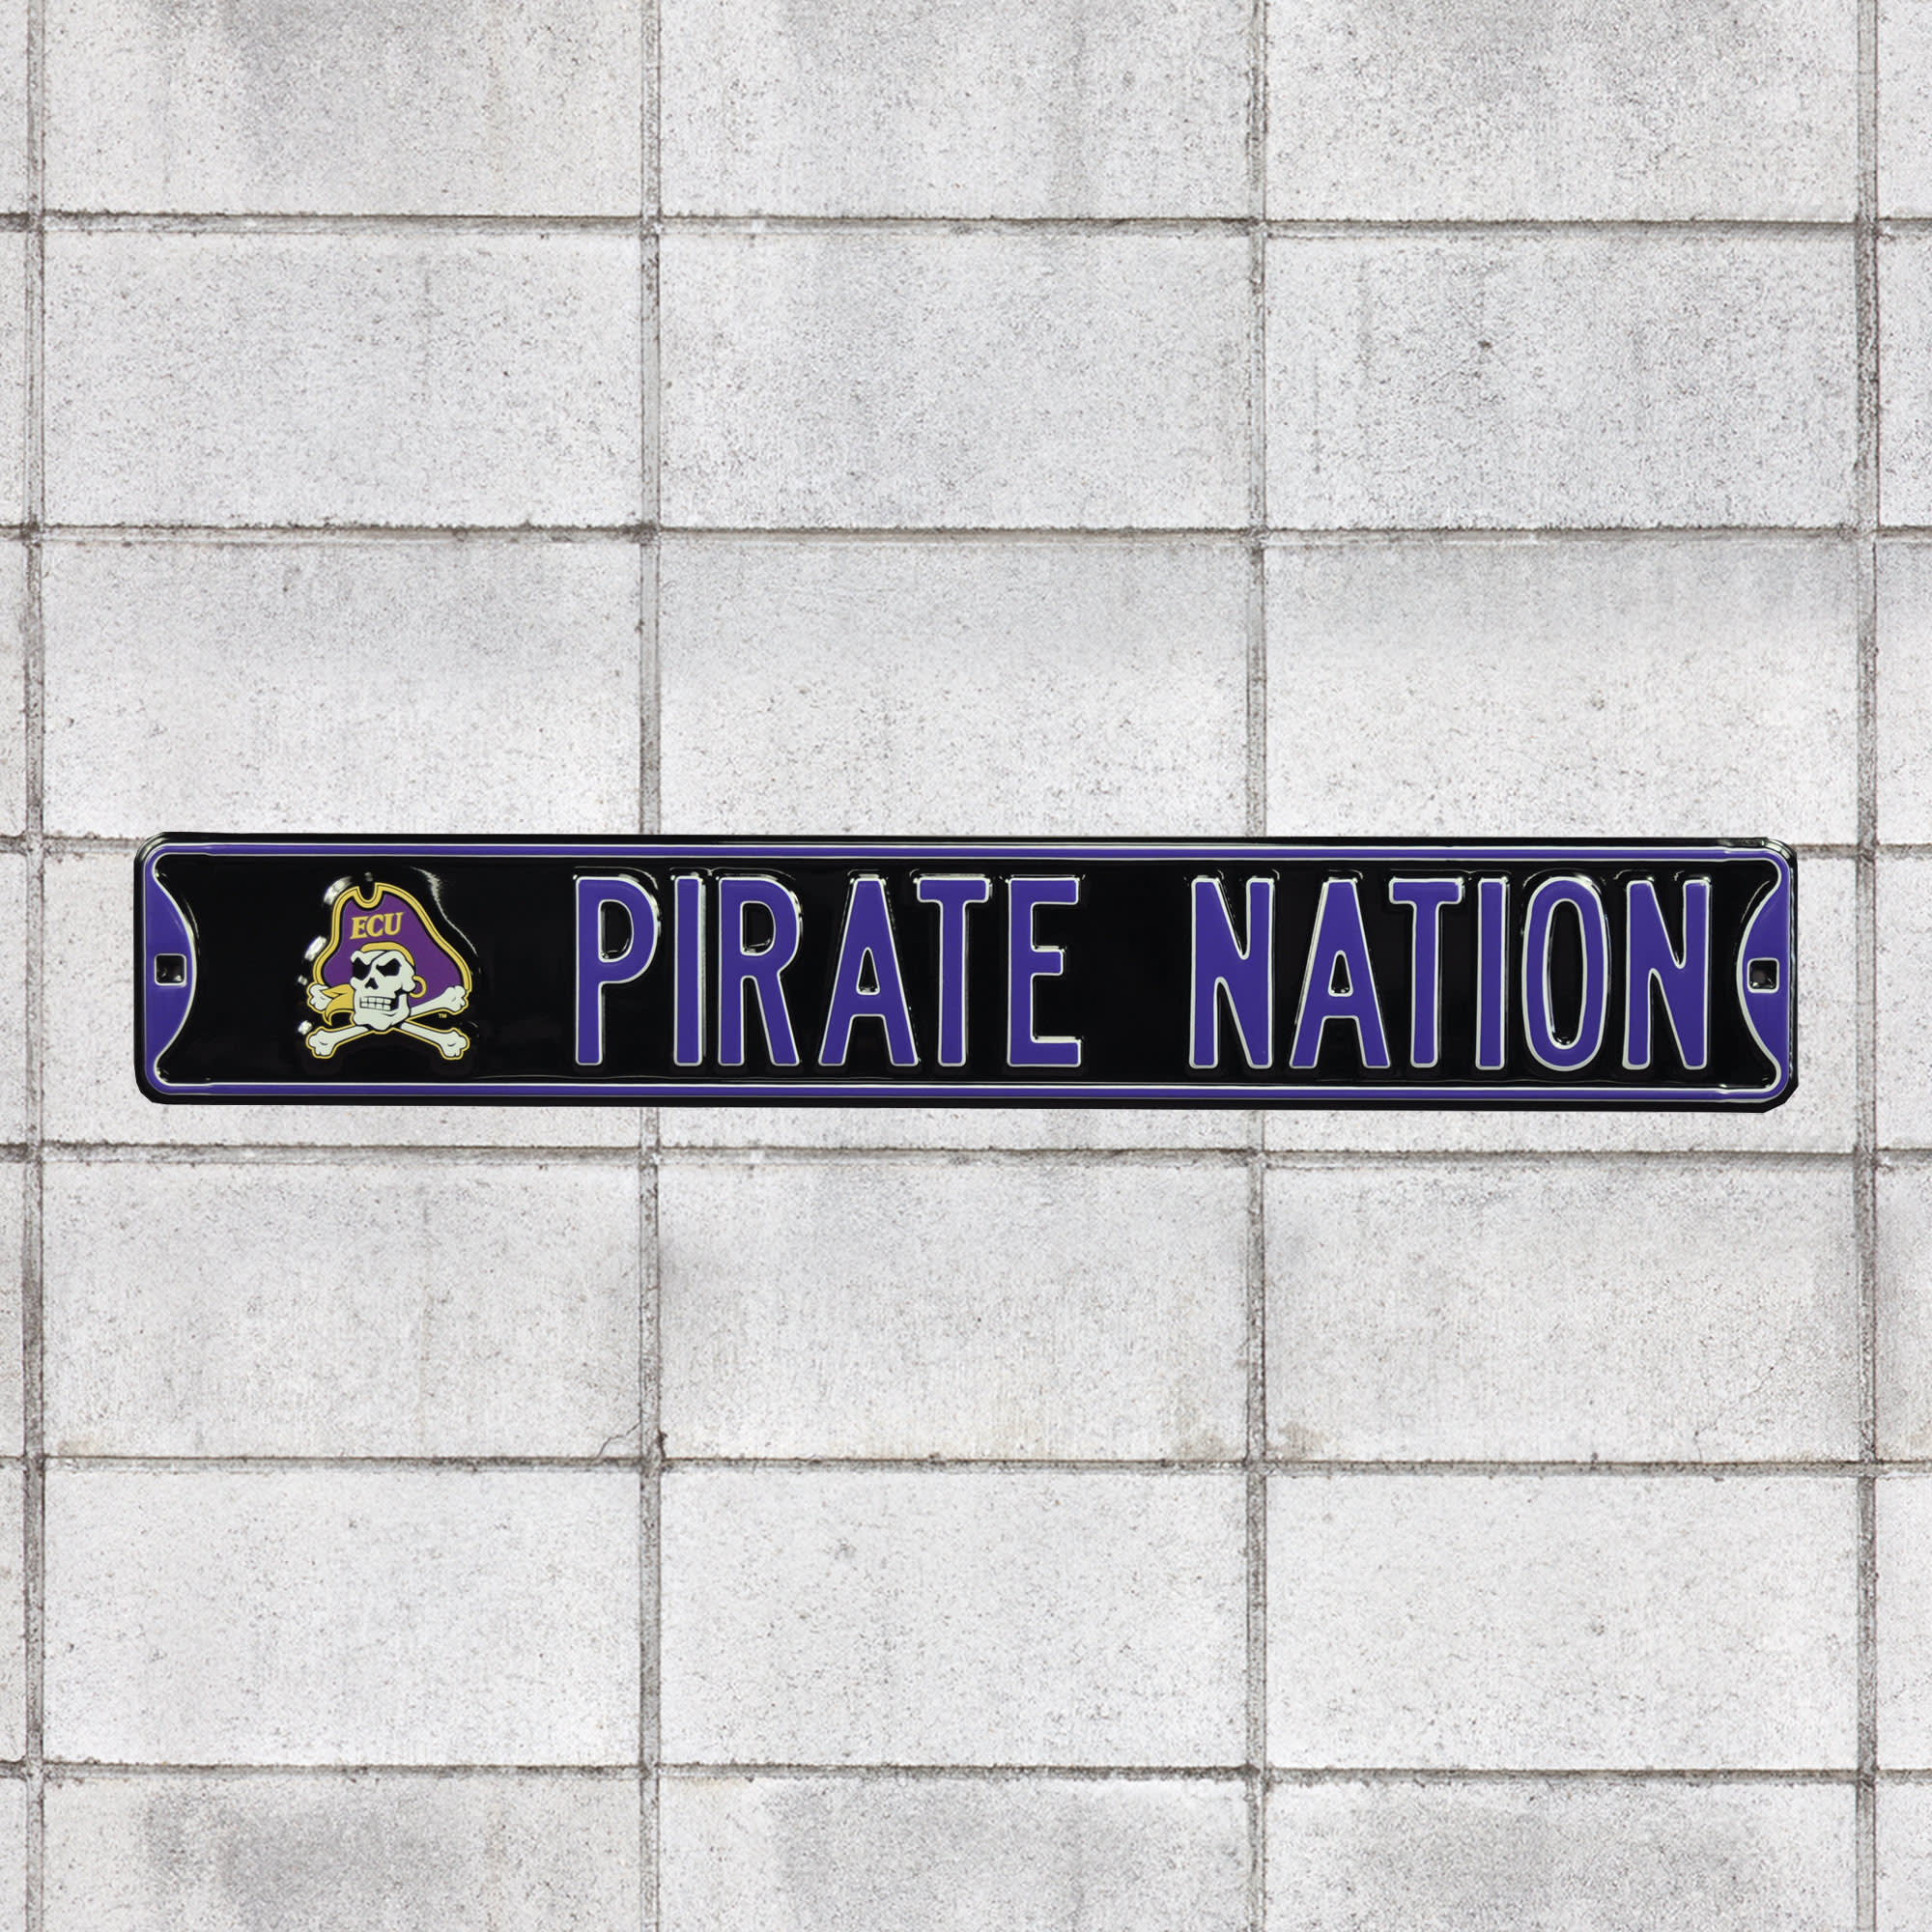 East Carolina Pirates: Pirate Nation - Officially Licensed Metal Street Sign by Fathead | 100% Steel